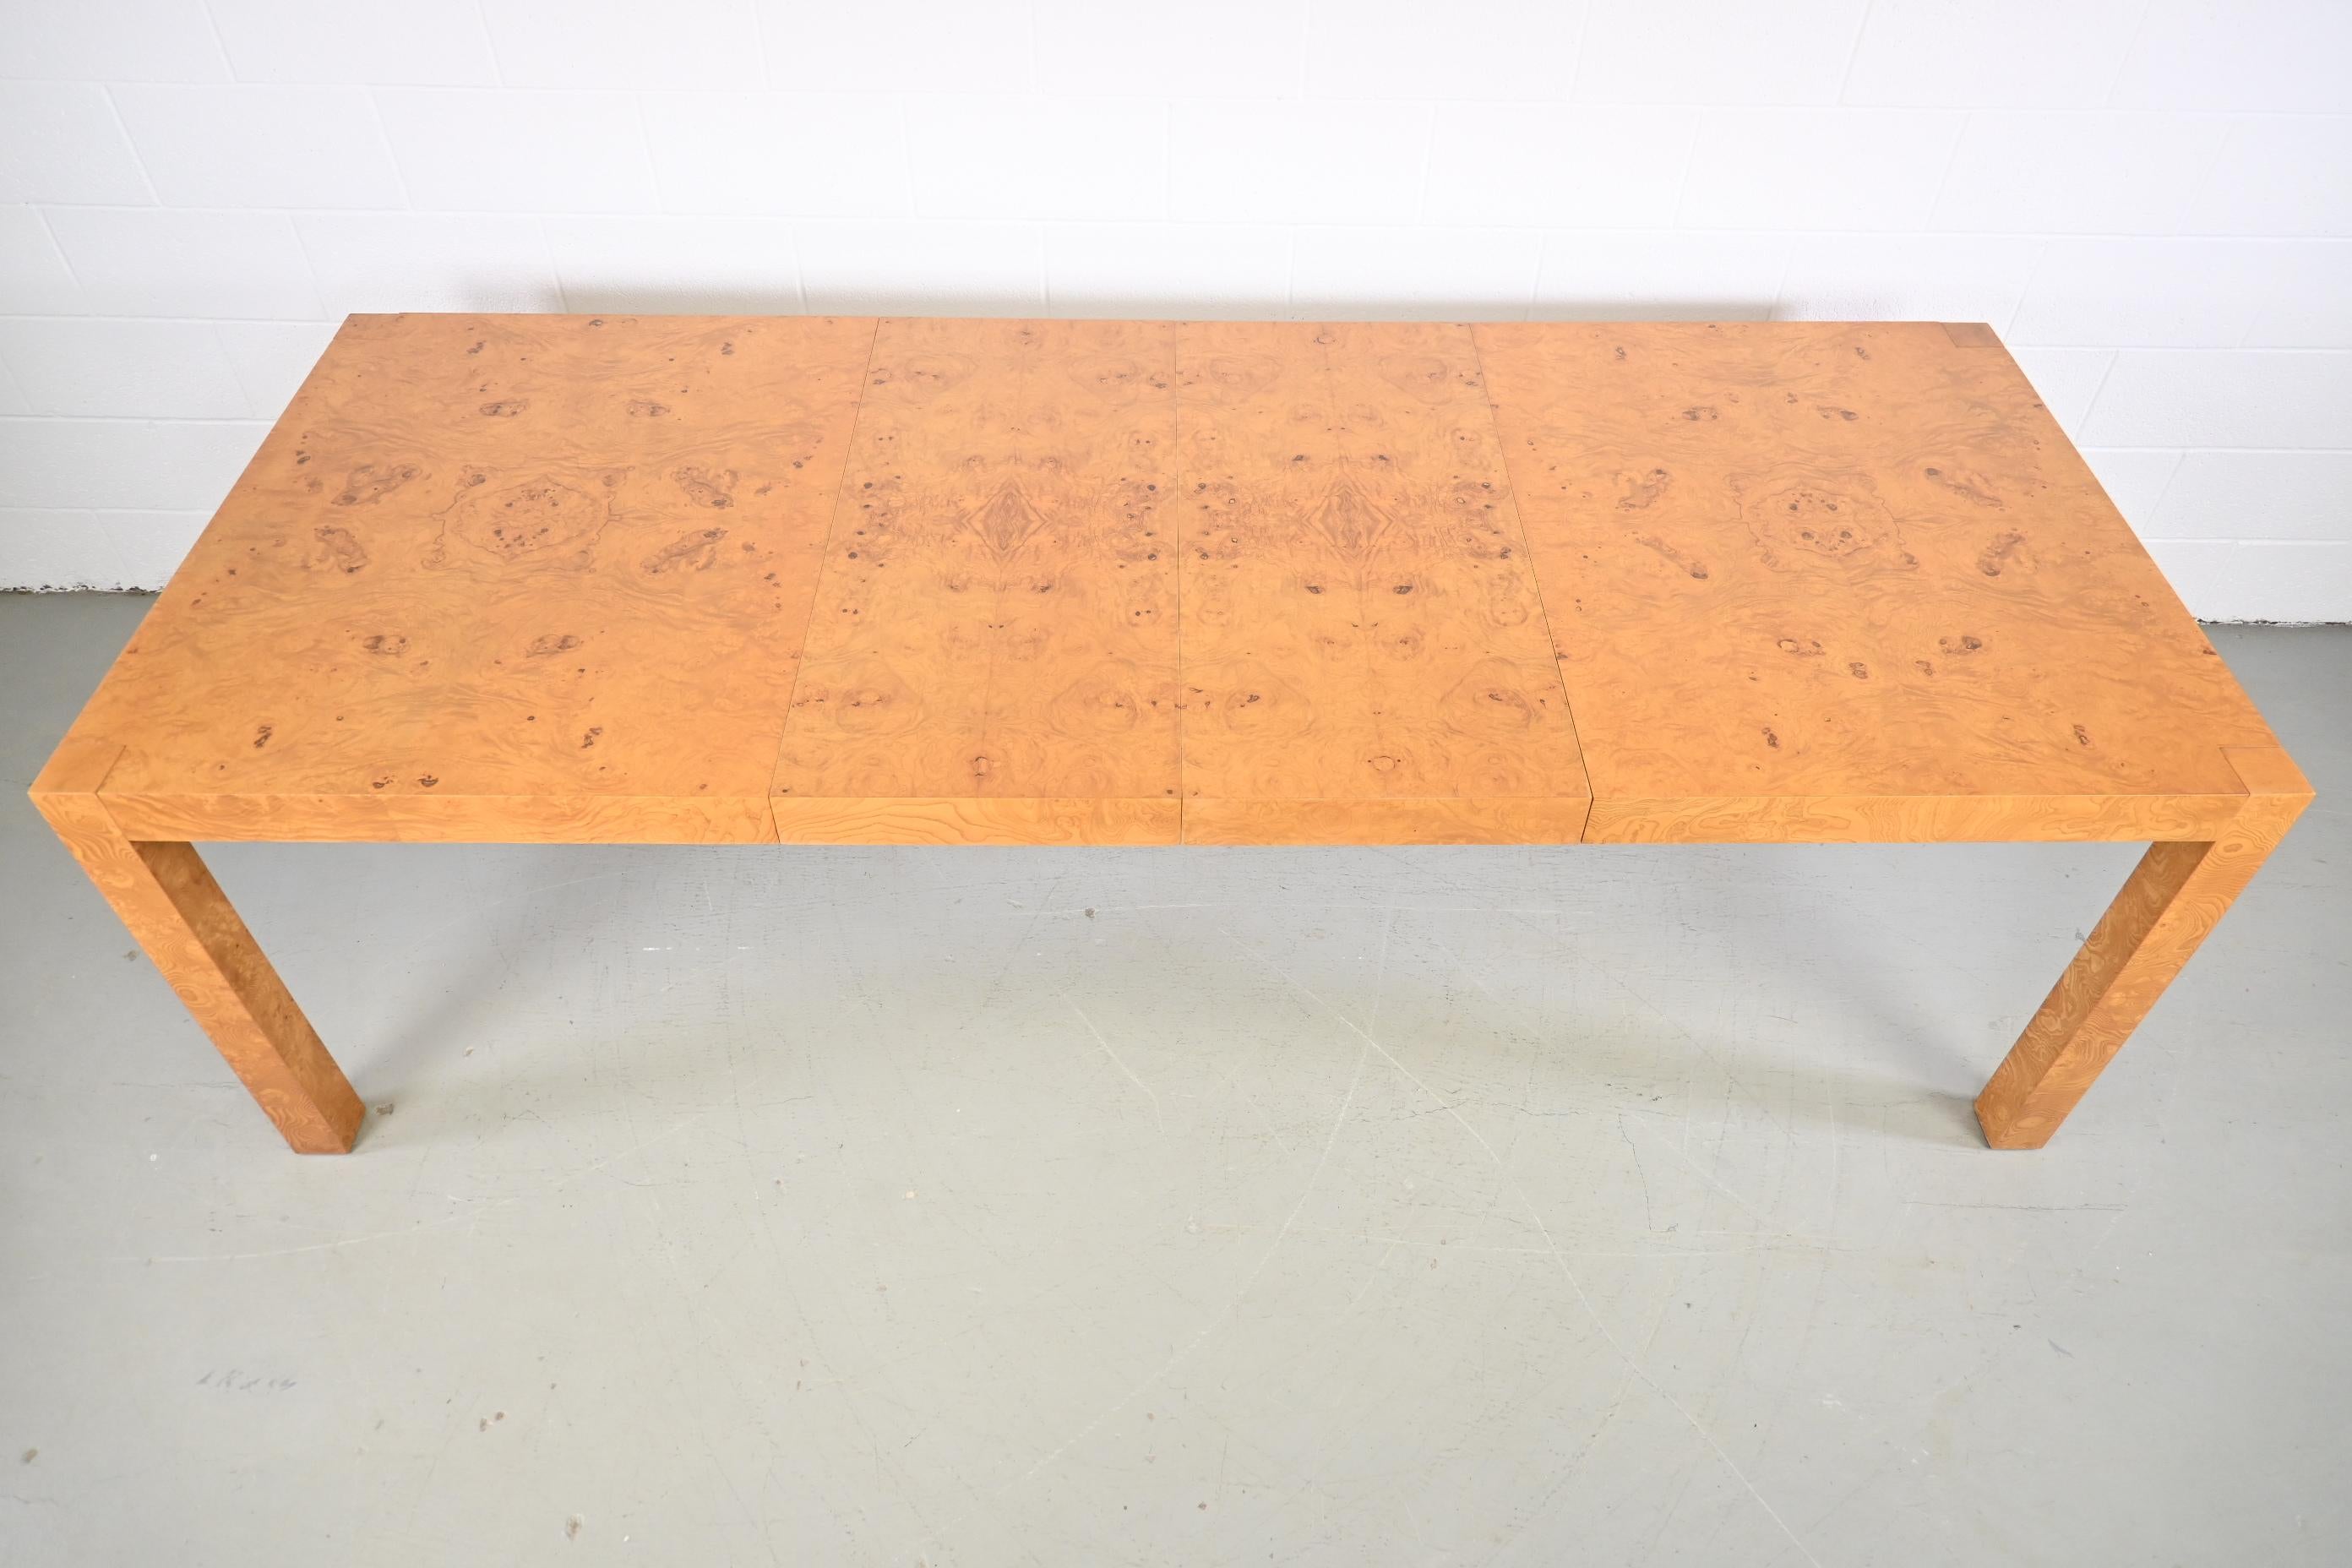 Lane Furniture Burl Parsons extension dining table in the style of Milo Baughman

Lane Furniture, USA, 1970s

Measures: 64 Wide x 40 Deep x 30 High. Extends up to 100